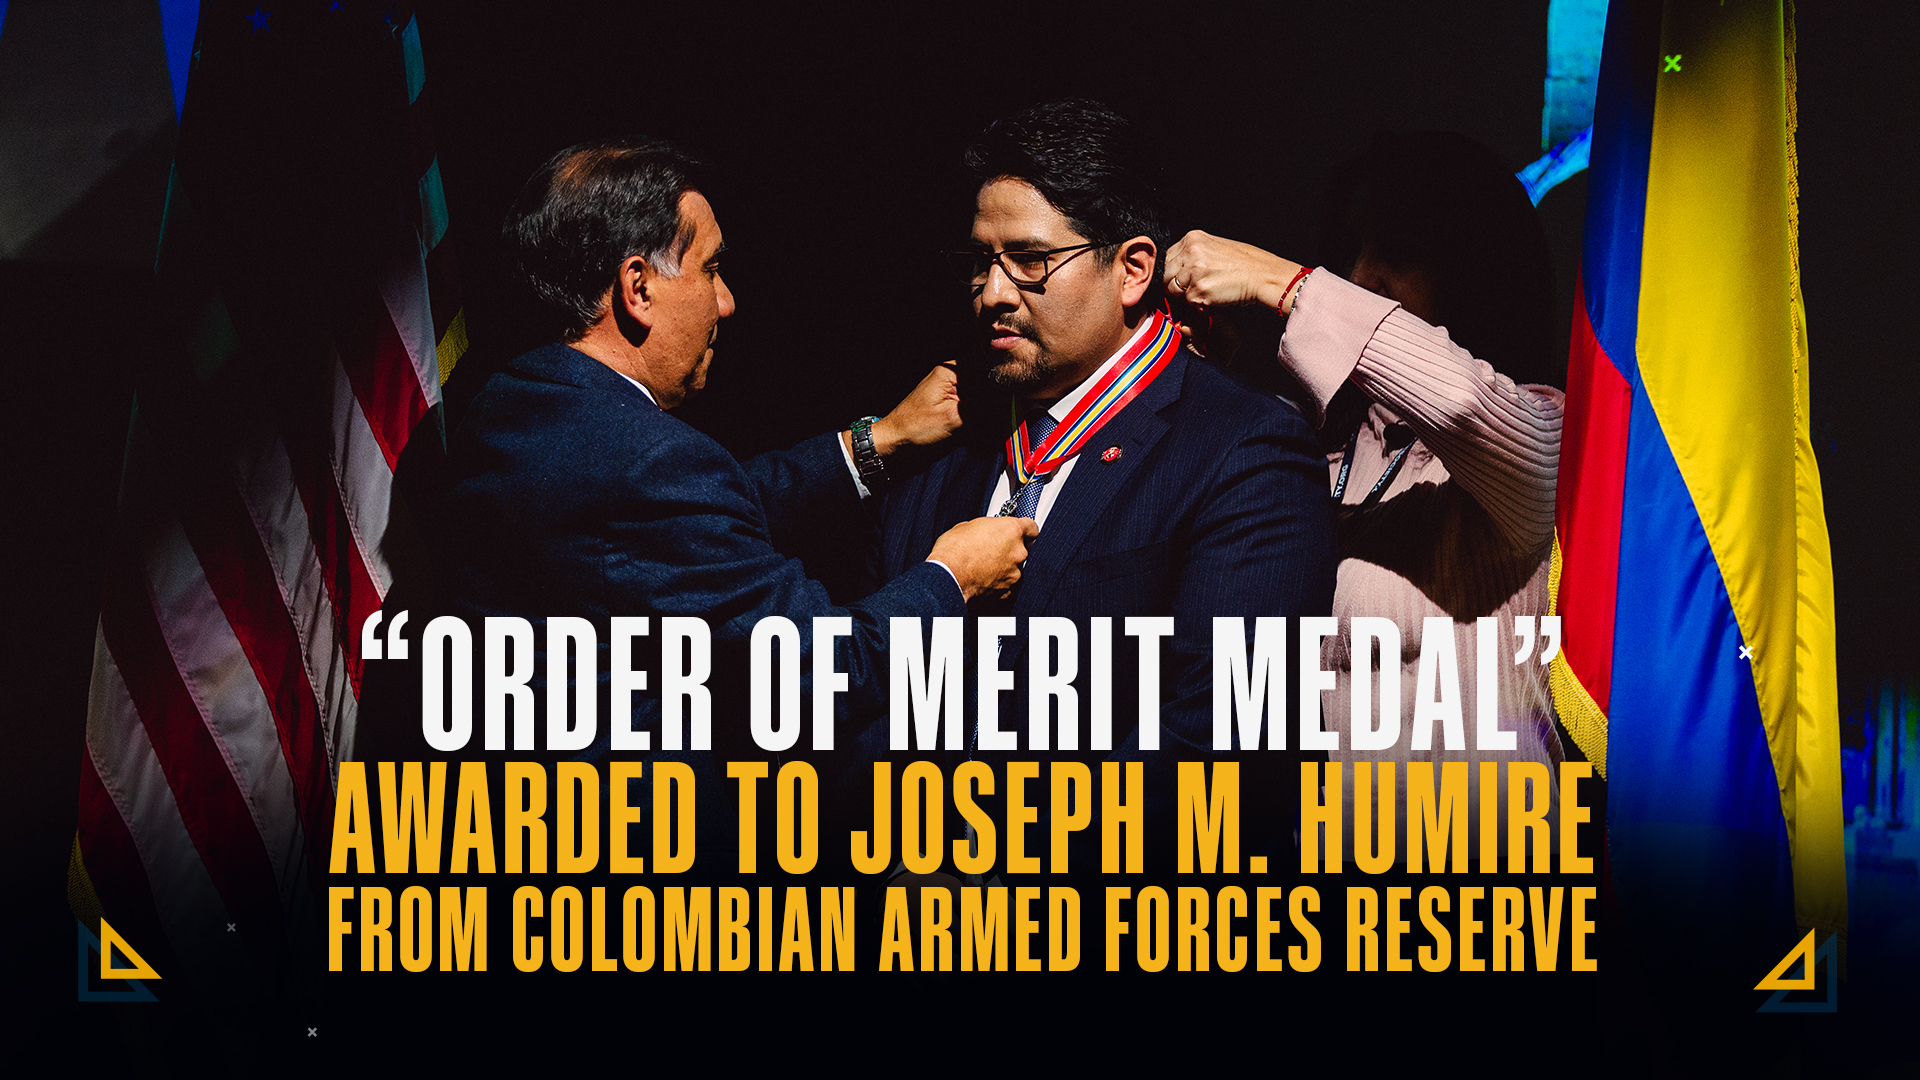 Order of Merit Medal awarded to Joseph M. Humire from Colombian Armed Forces Reserve